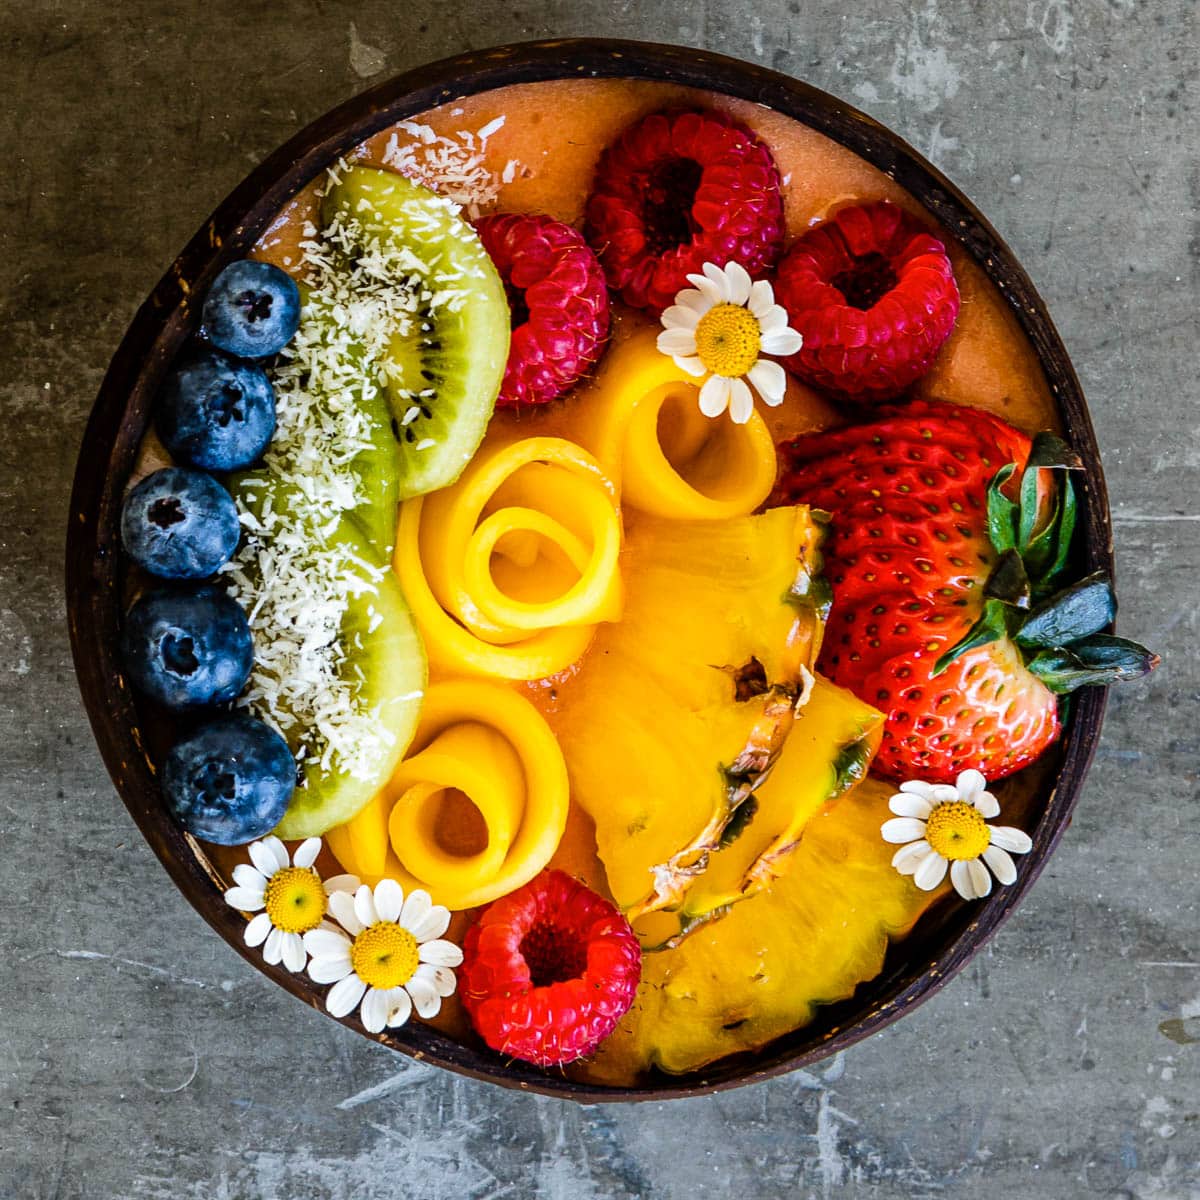 coconut bowl full of smoothie and topped with fresh blueberries, coconut flakes, kiwi, mango flowers, raspberries, pineapple, strawberries and white flowers.